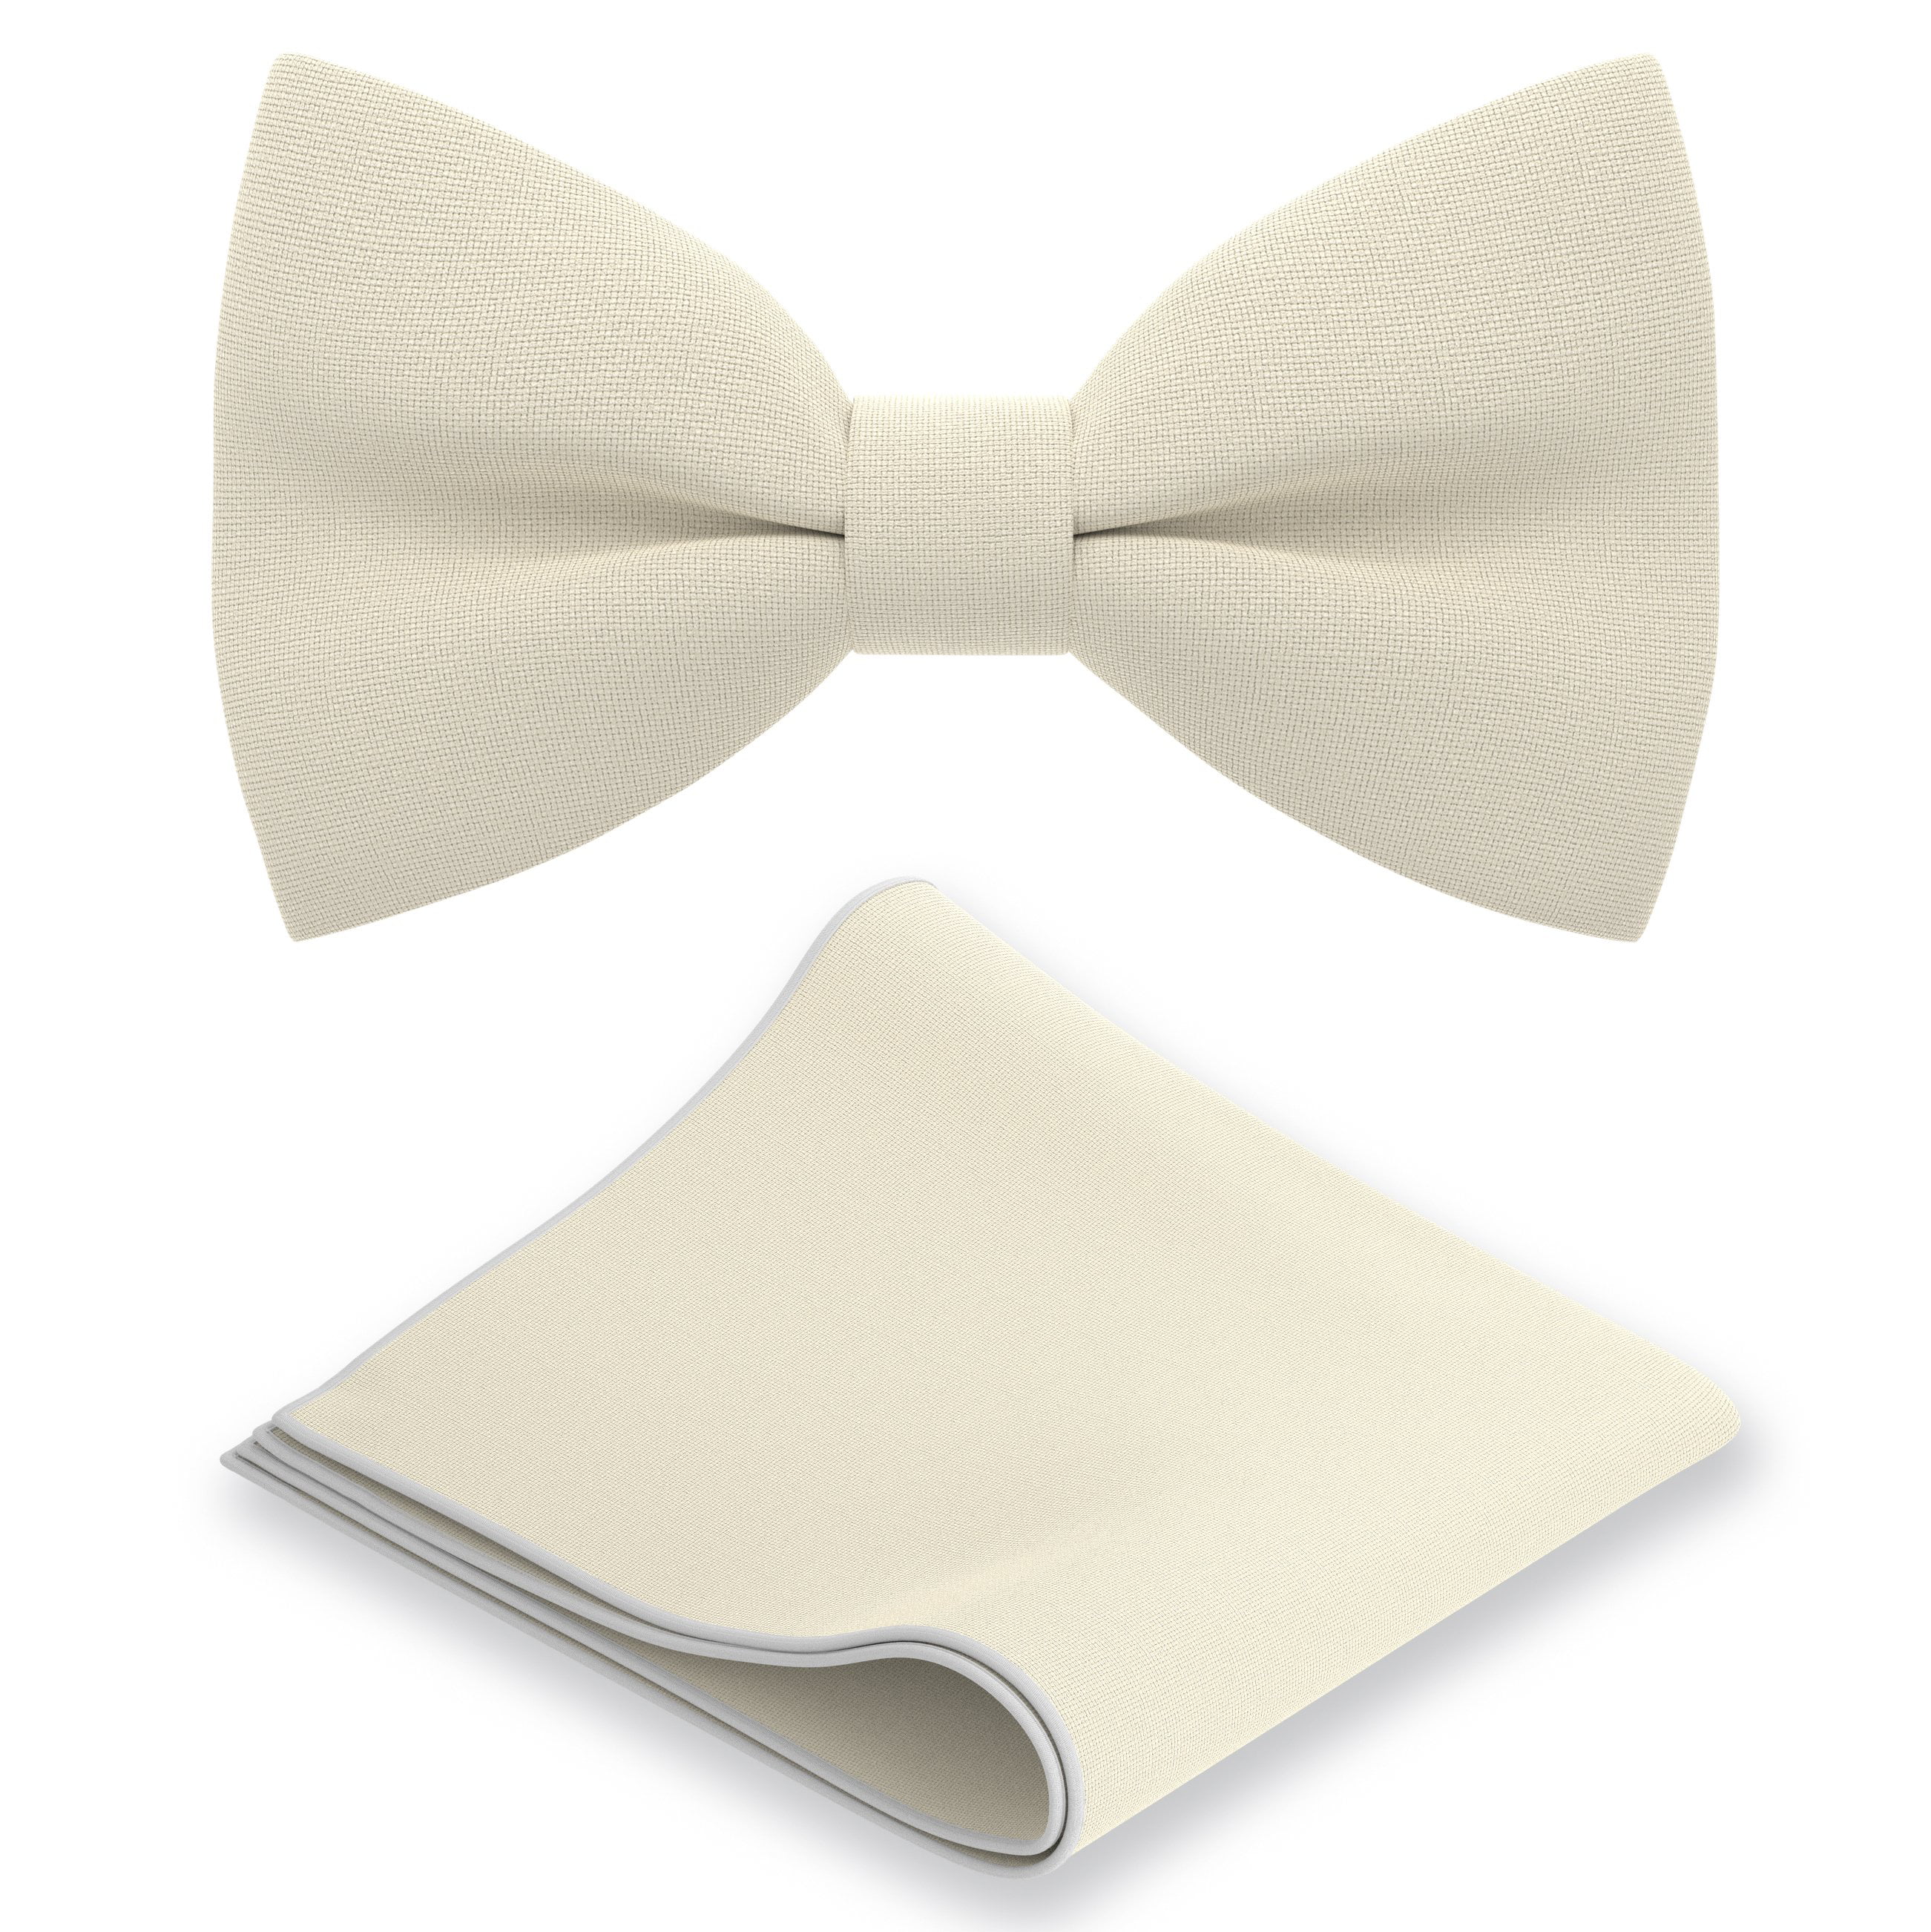 New Men's Polyester Solid Formal Self-tied Bow Tie & hankie set ivory wedding 